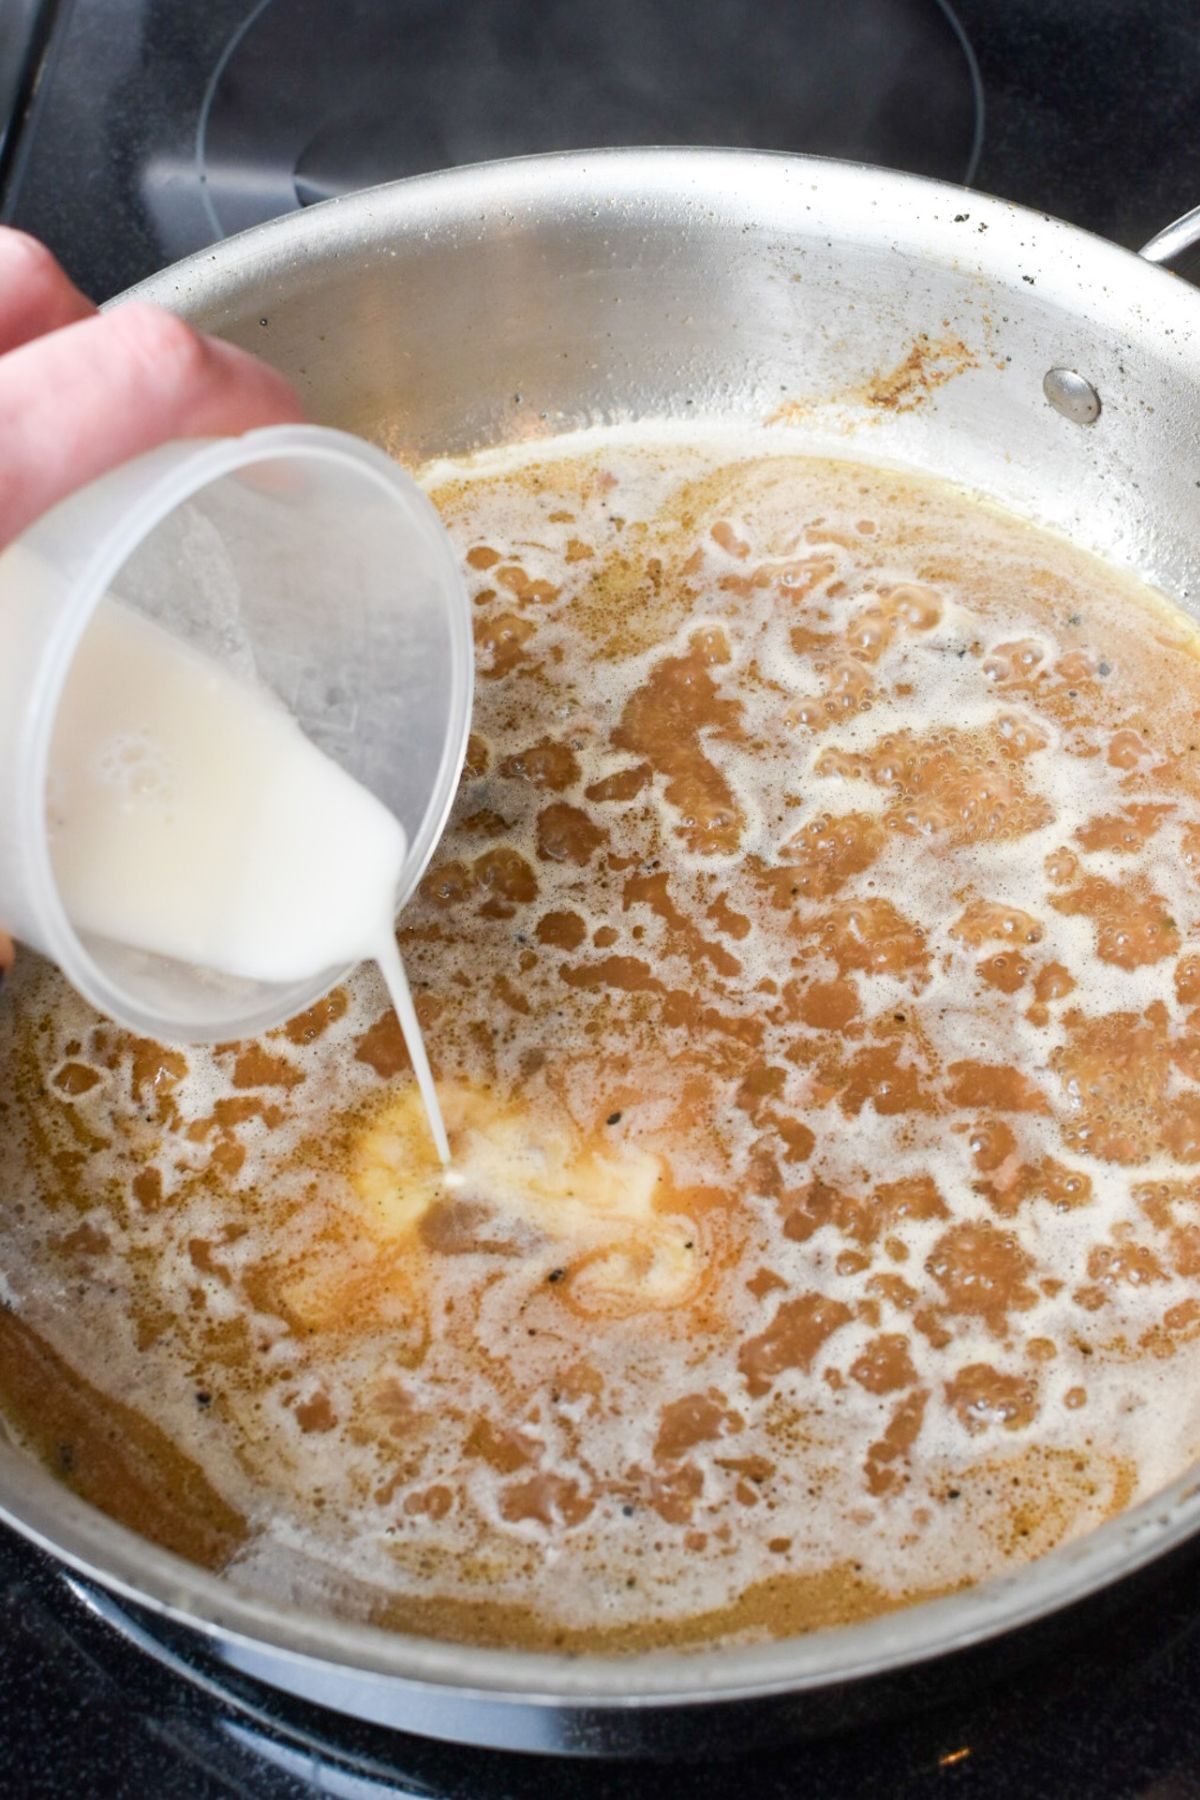 Adding a flour and water mixture to the pan to thicken the gravy.